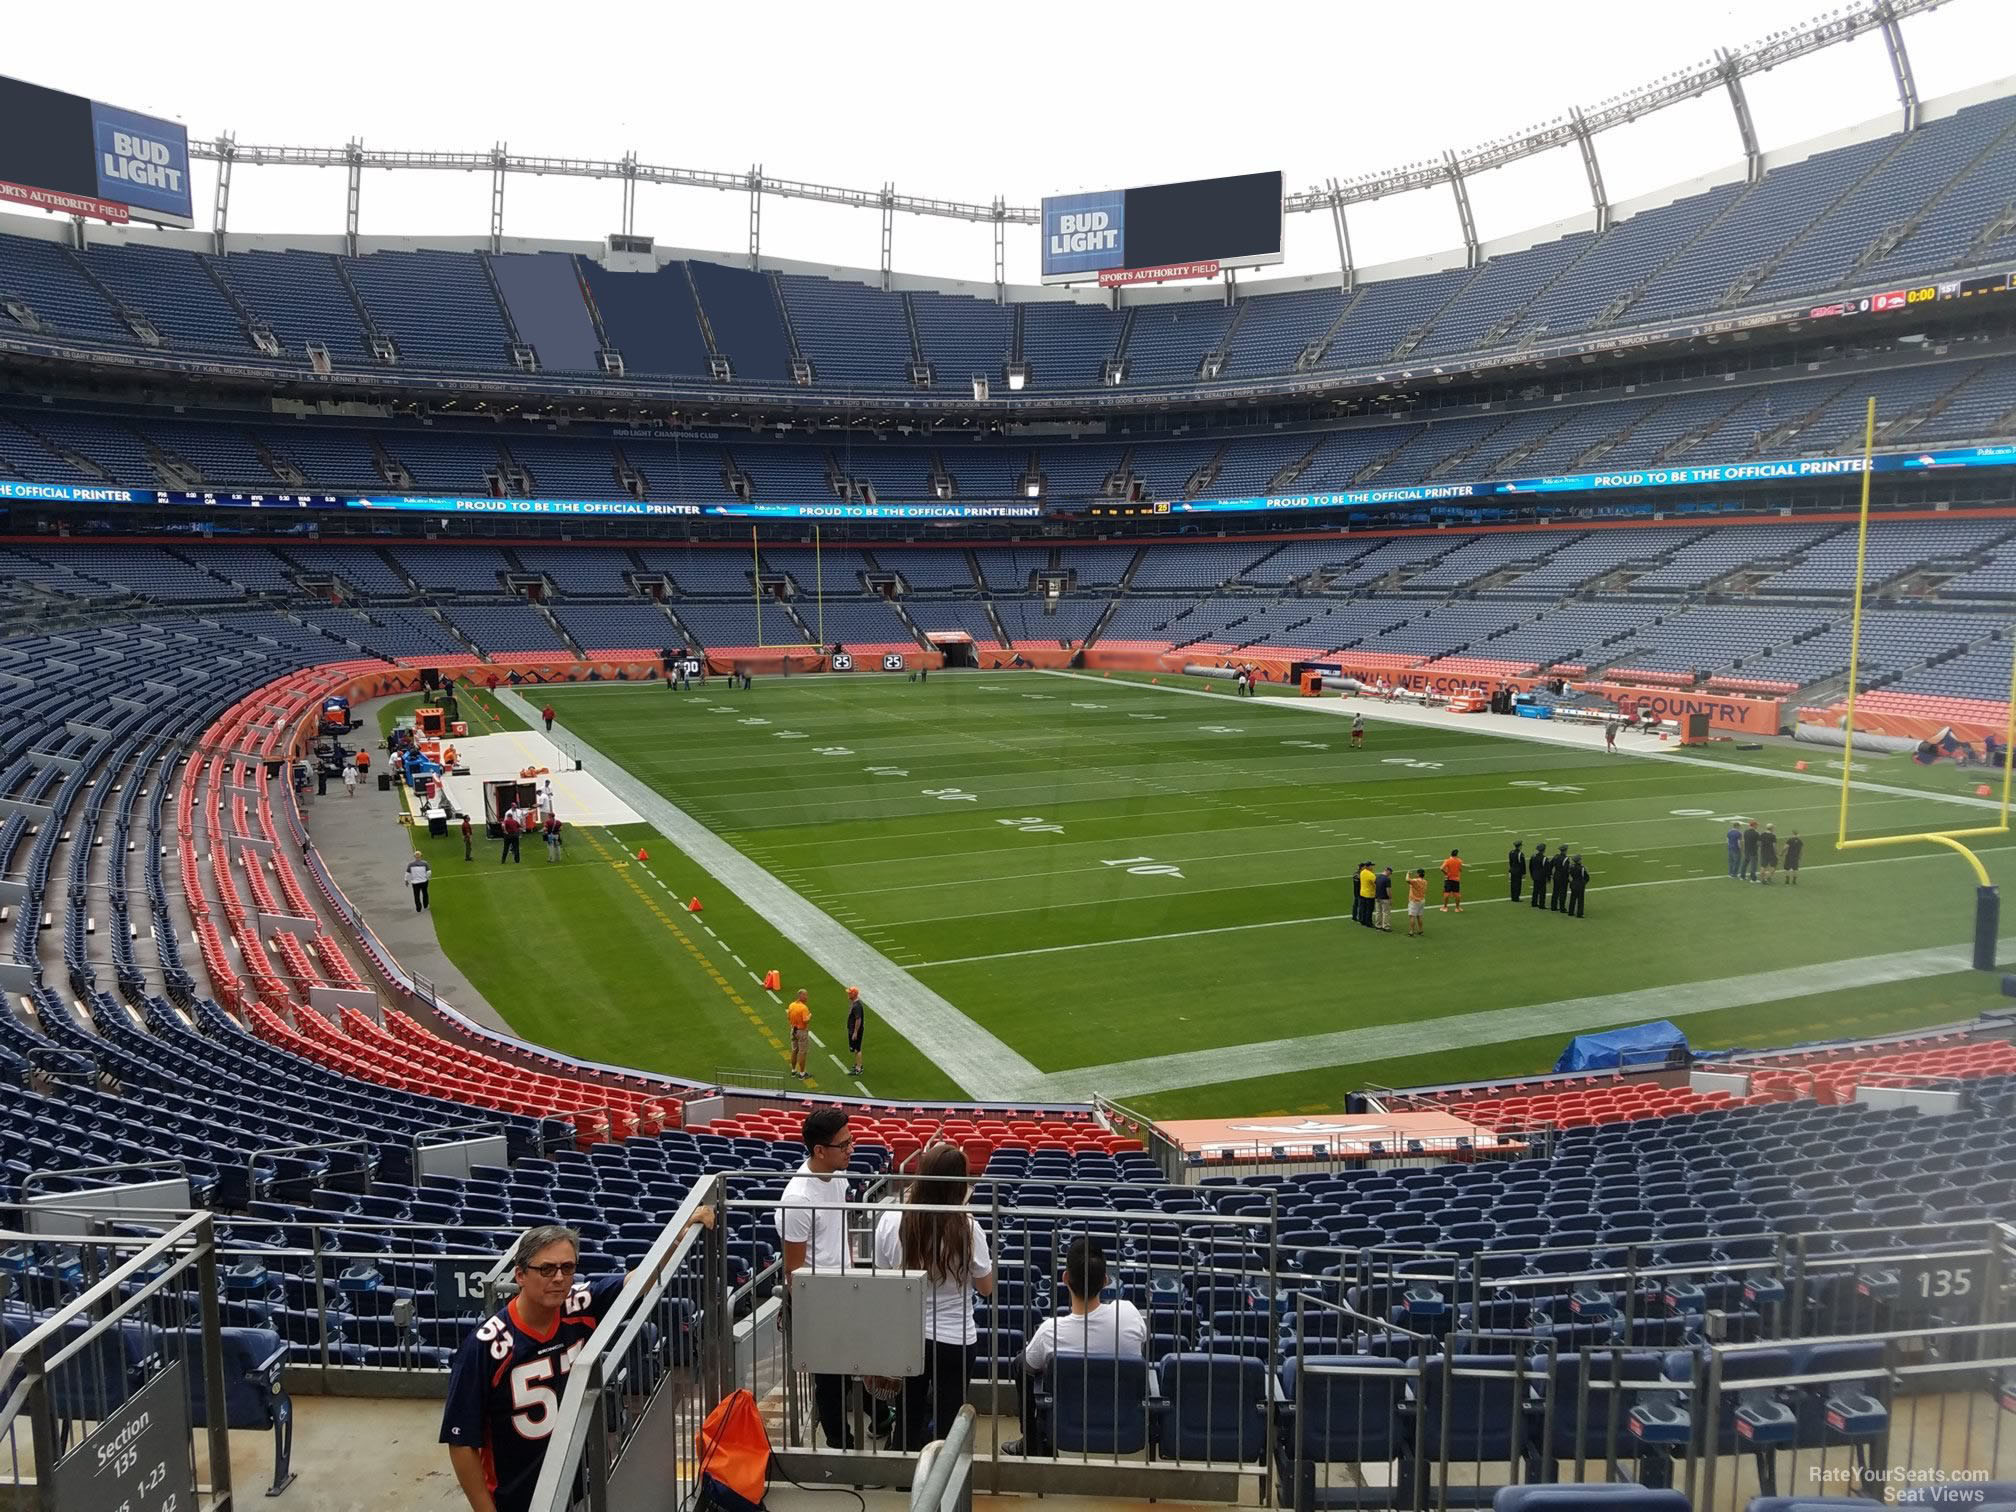 section 135, row 30 seat view  - empower field (at mile high)